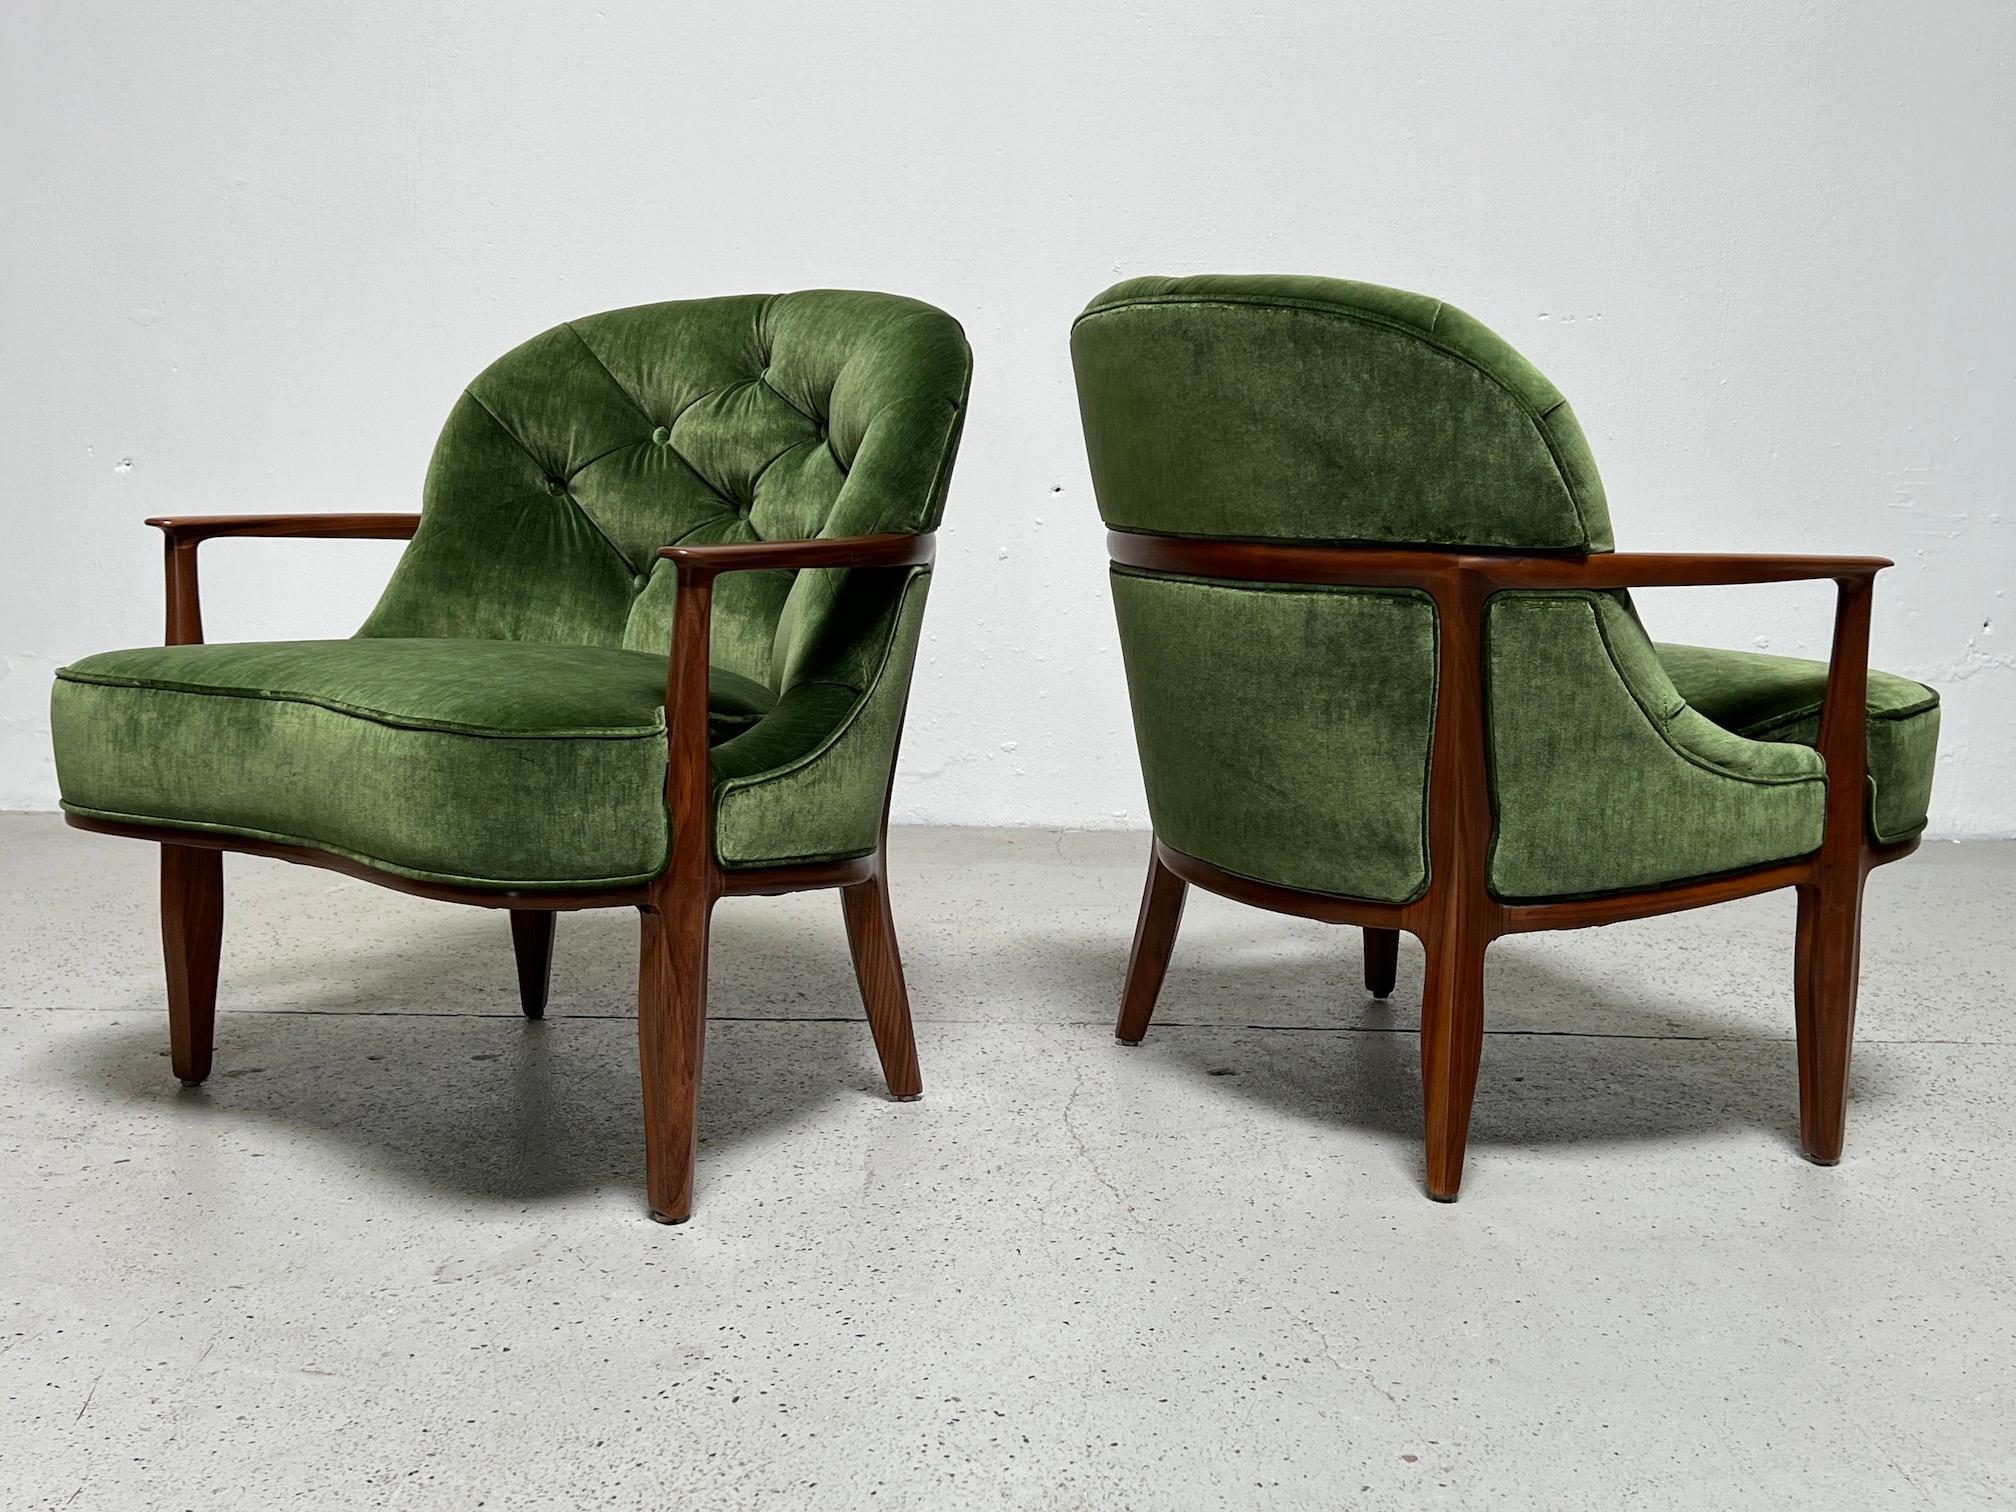 A beautifully restored set of four matching Janus lounge chairs with walnut frames and green velvet upholstery. Designed by Edward Wormley for Dunbar.